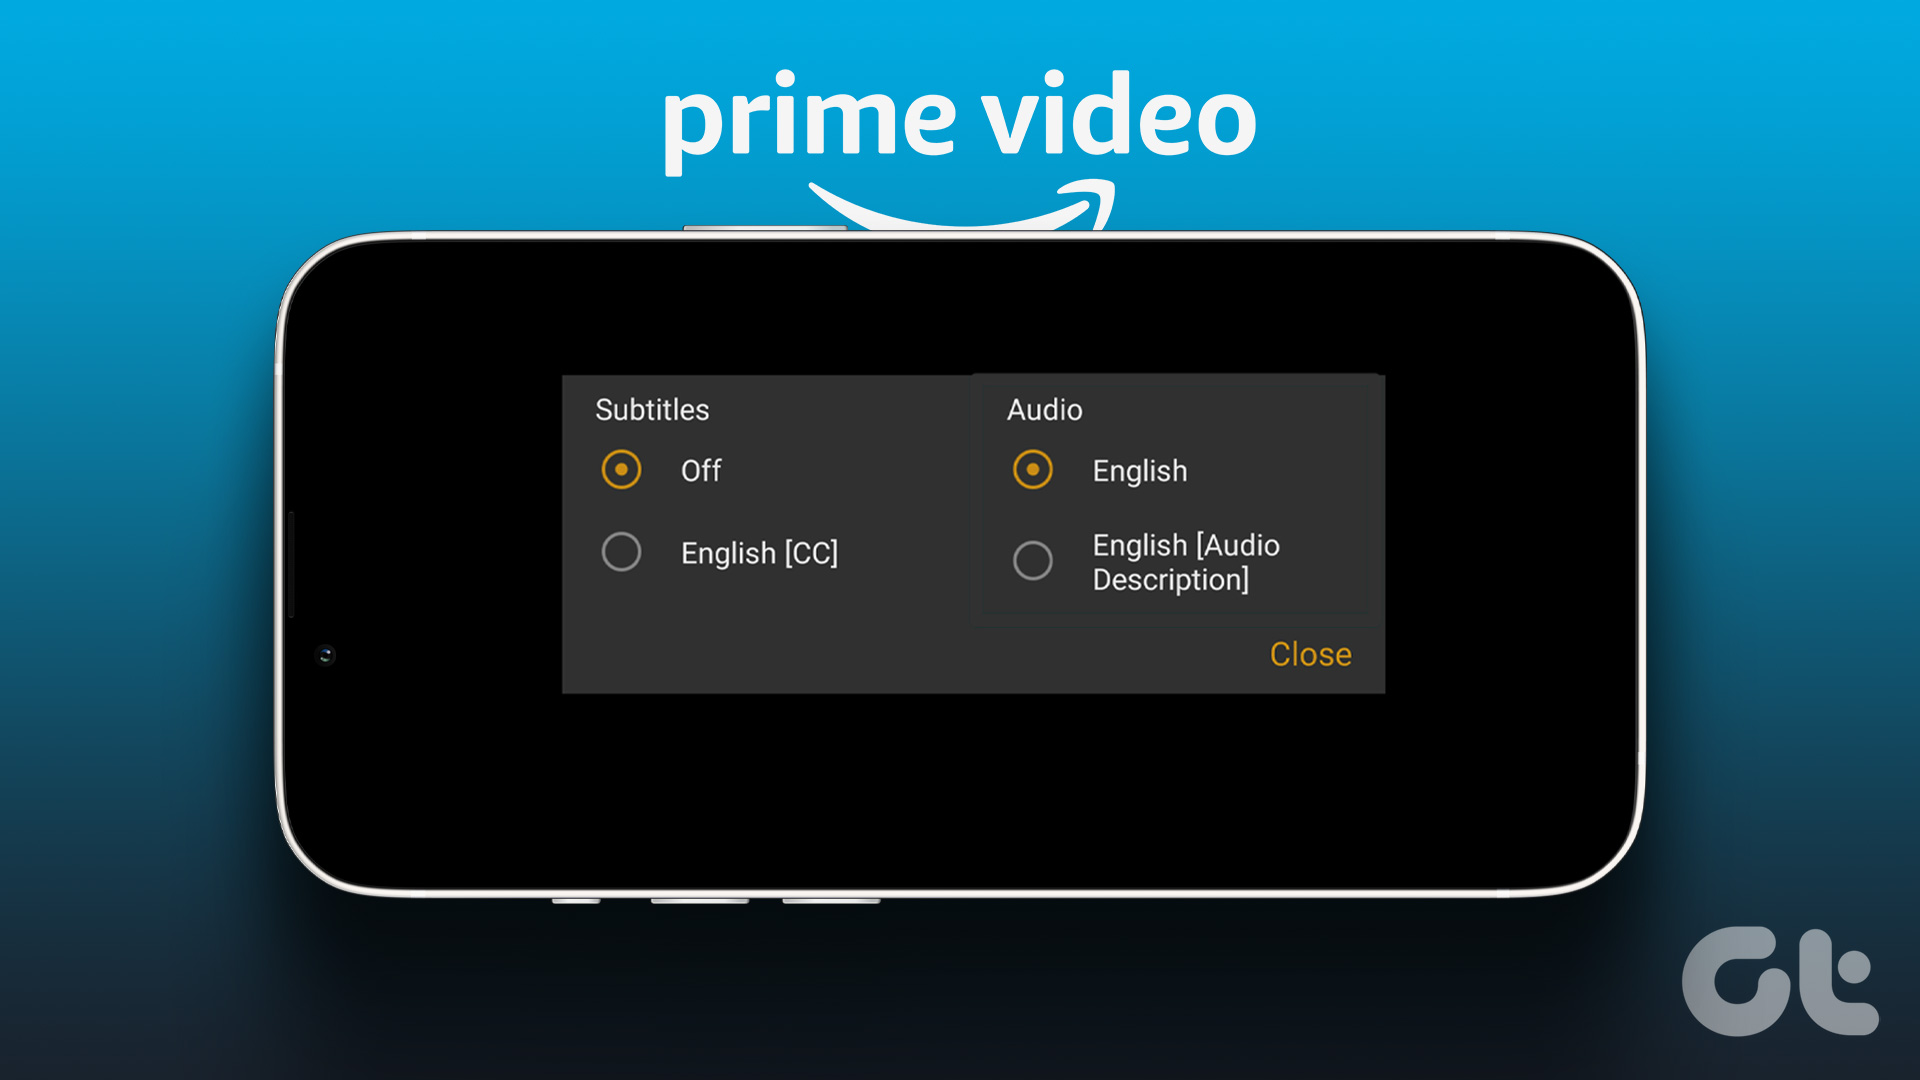 How to Turn off Subtitles on Prime Video